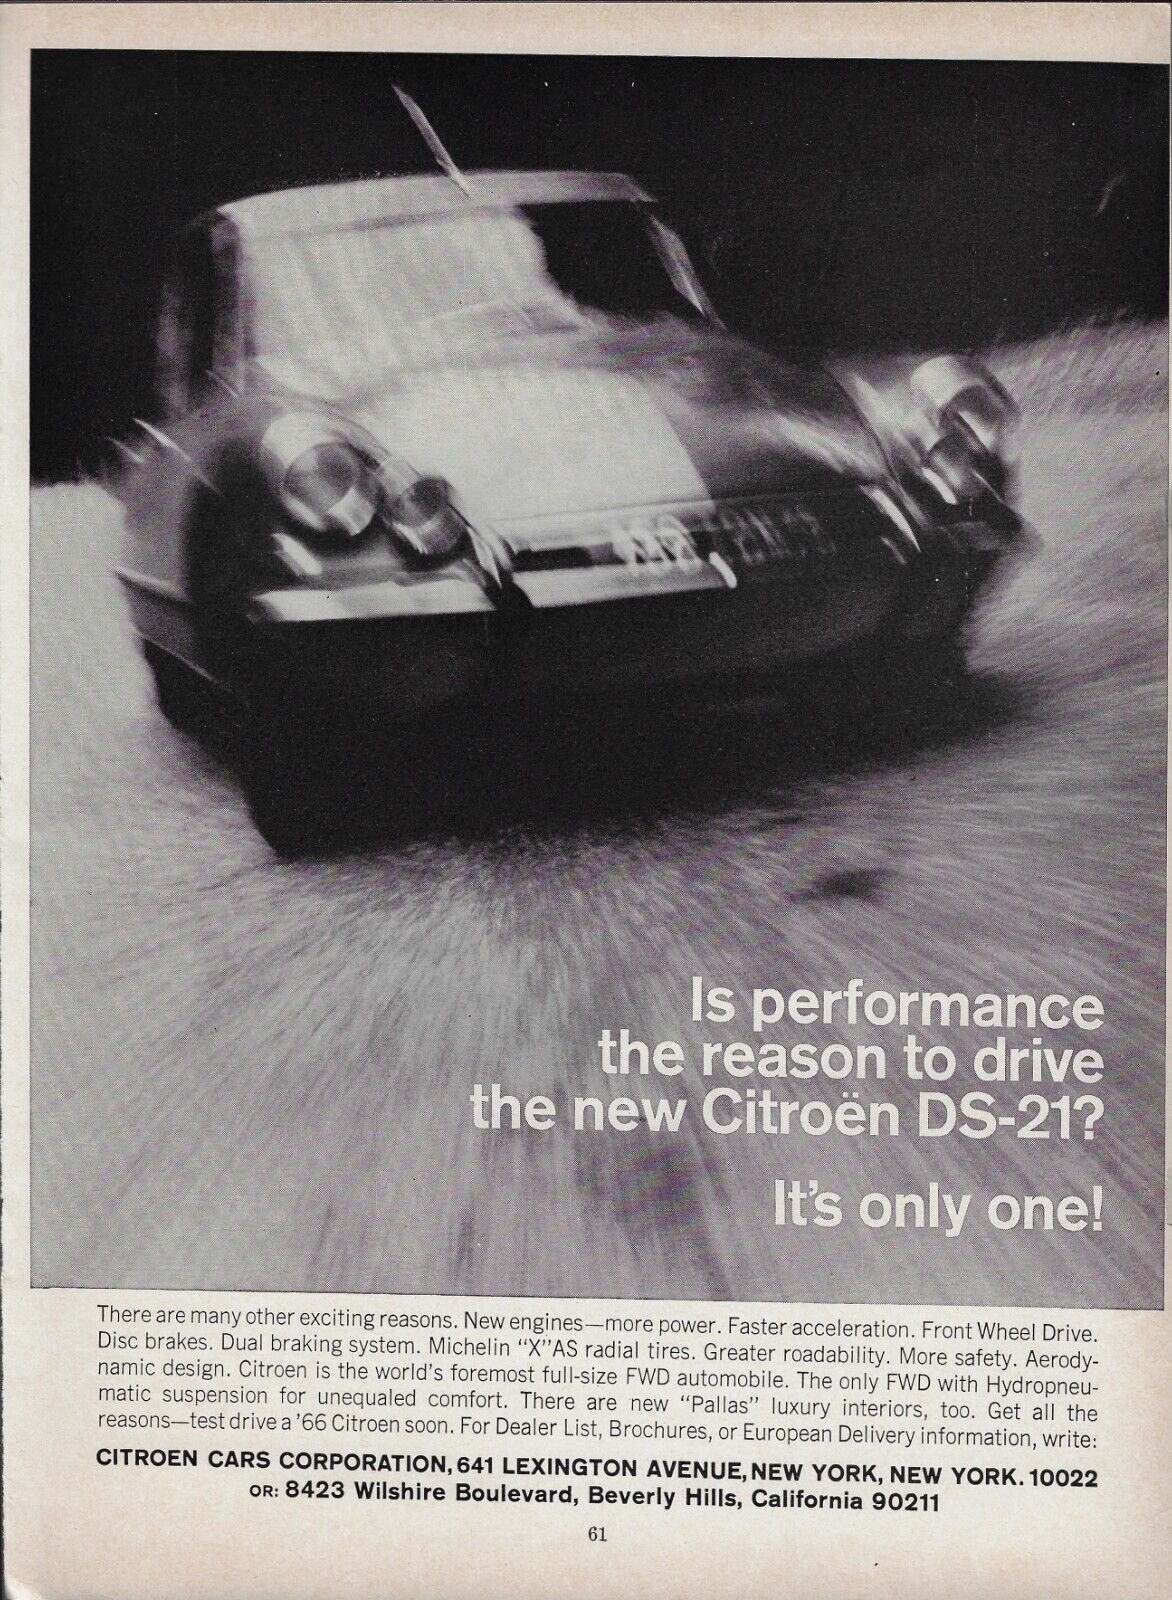 1966 Citroen DS-21 New Engine Faster Acceleration Exciting Car Vintage PRINT AD